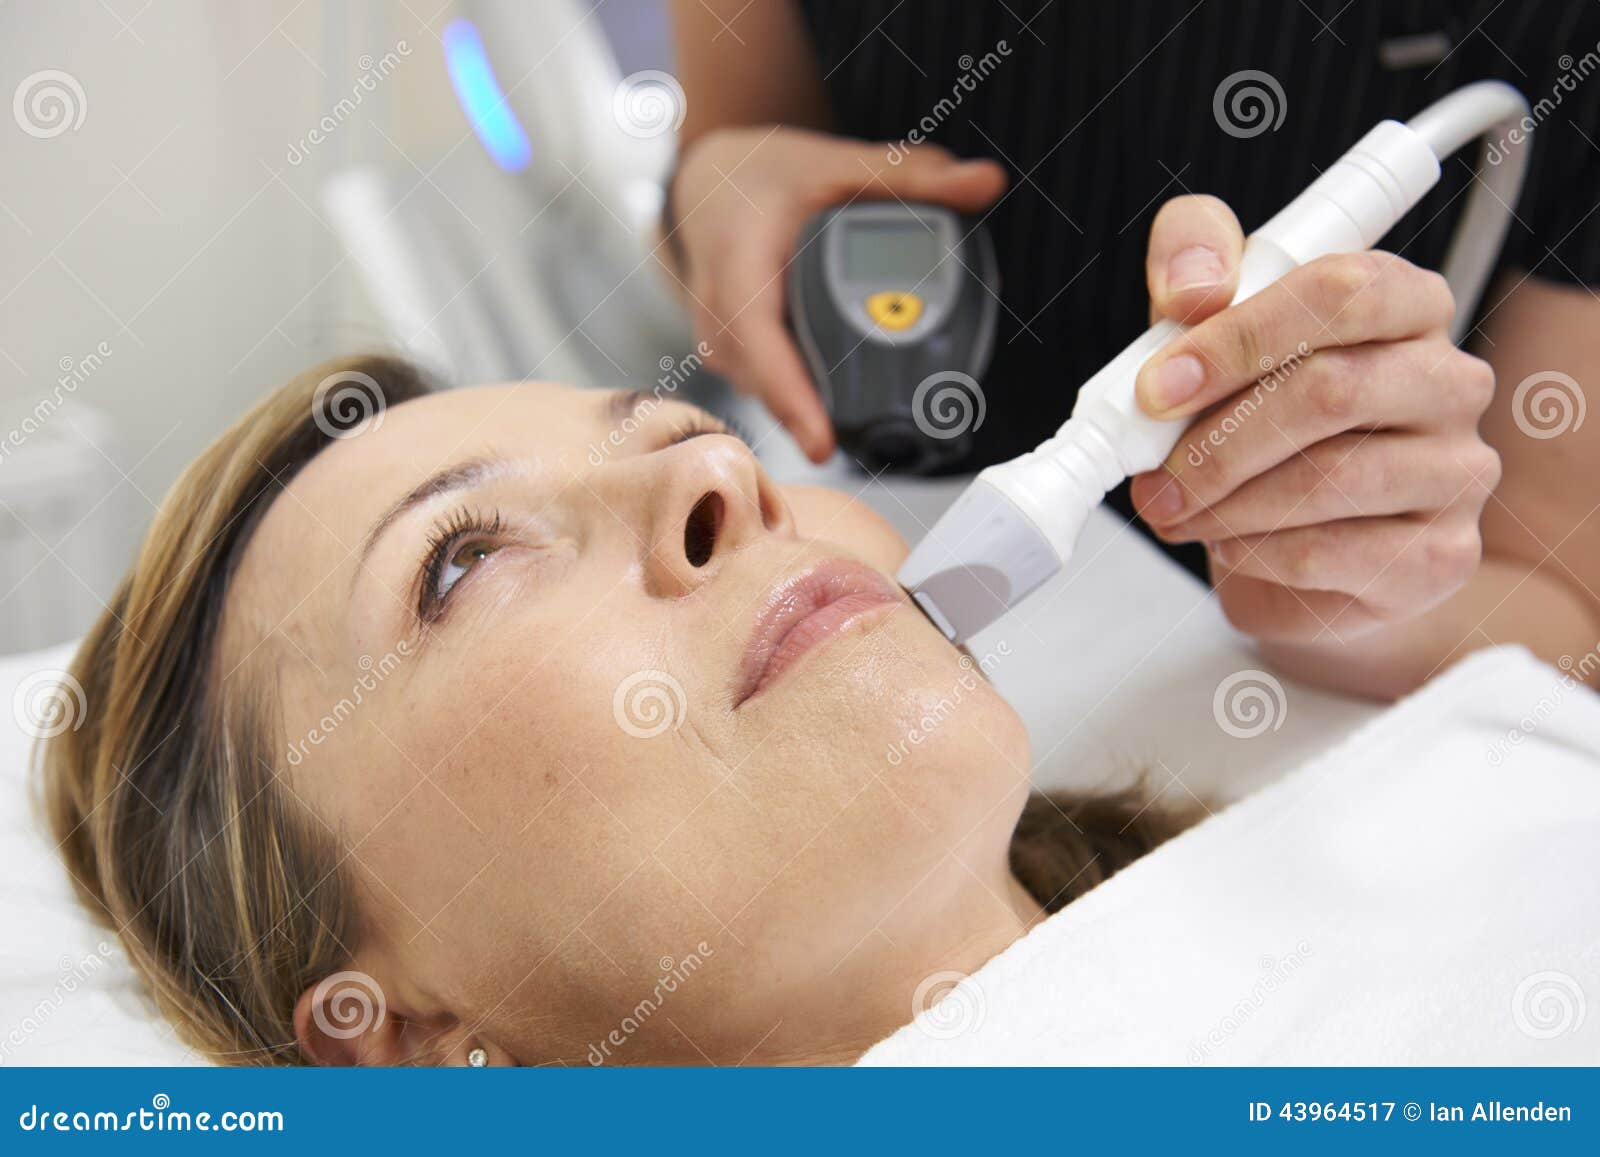 beautician carrying out ultrasound skin rejuvenation treatment